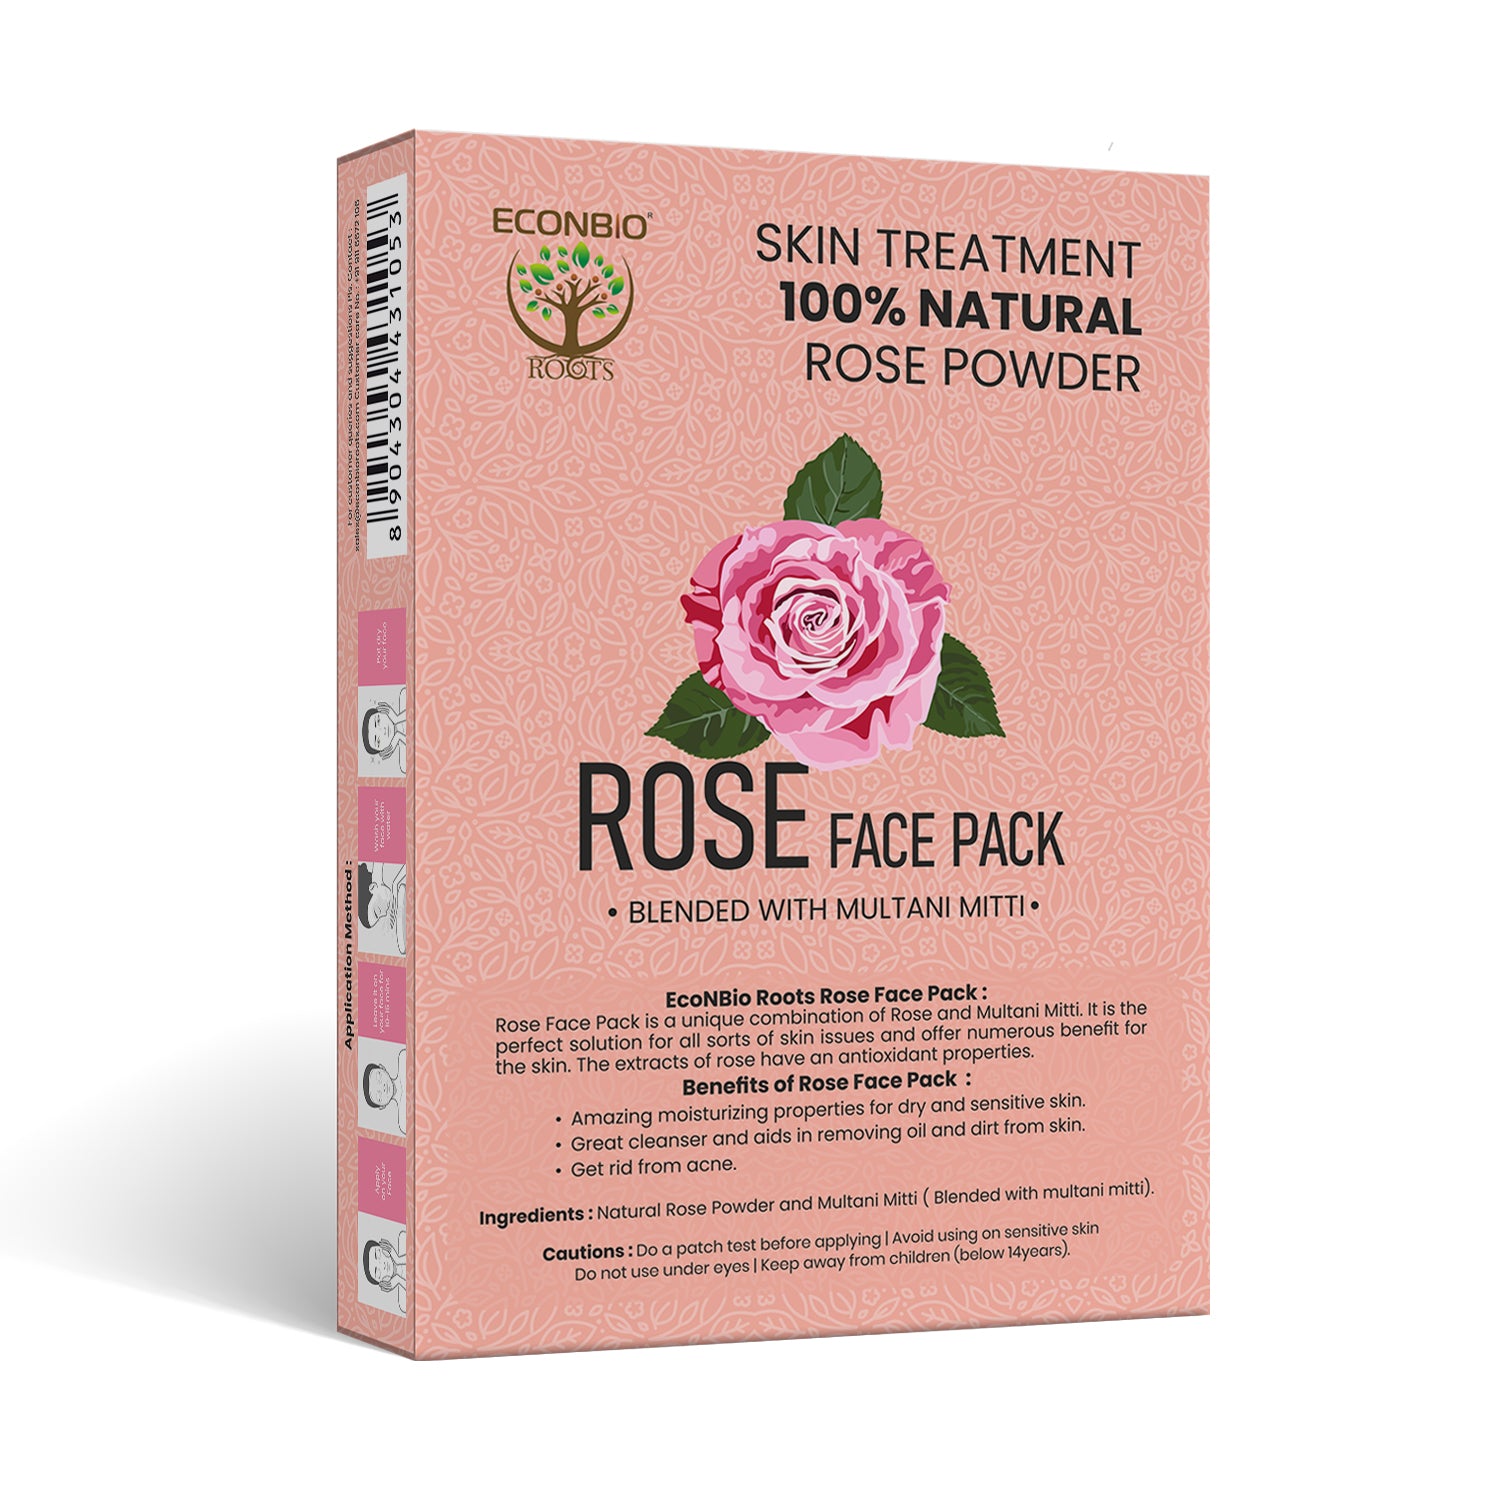 ECONBIO ROOTS 100% Natural Rose Face Pack 50g (Pack of 3)